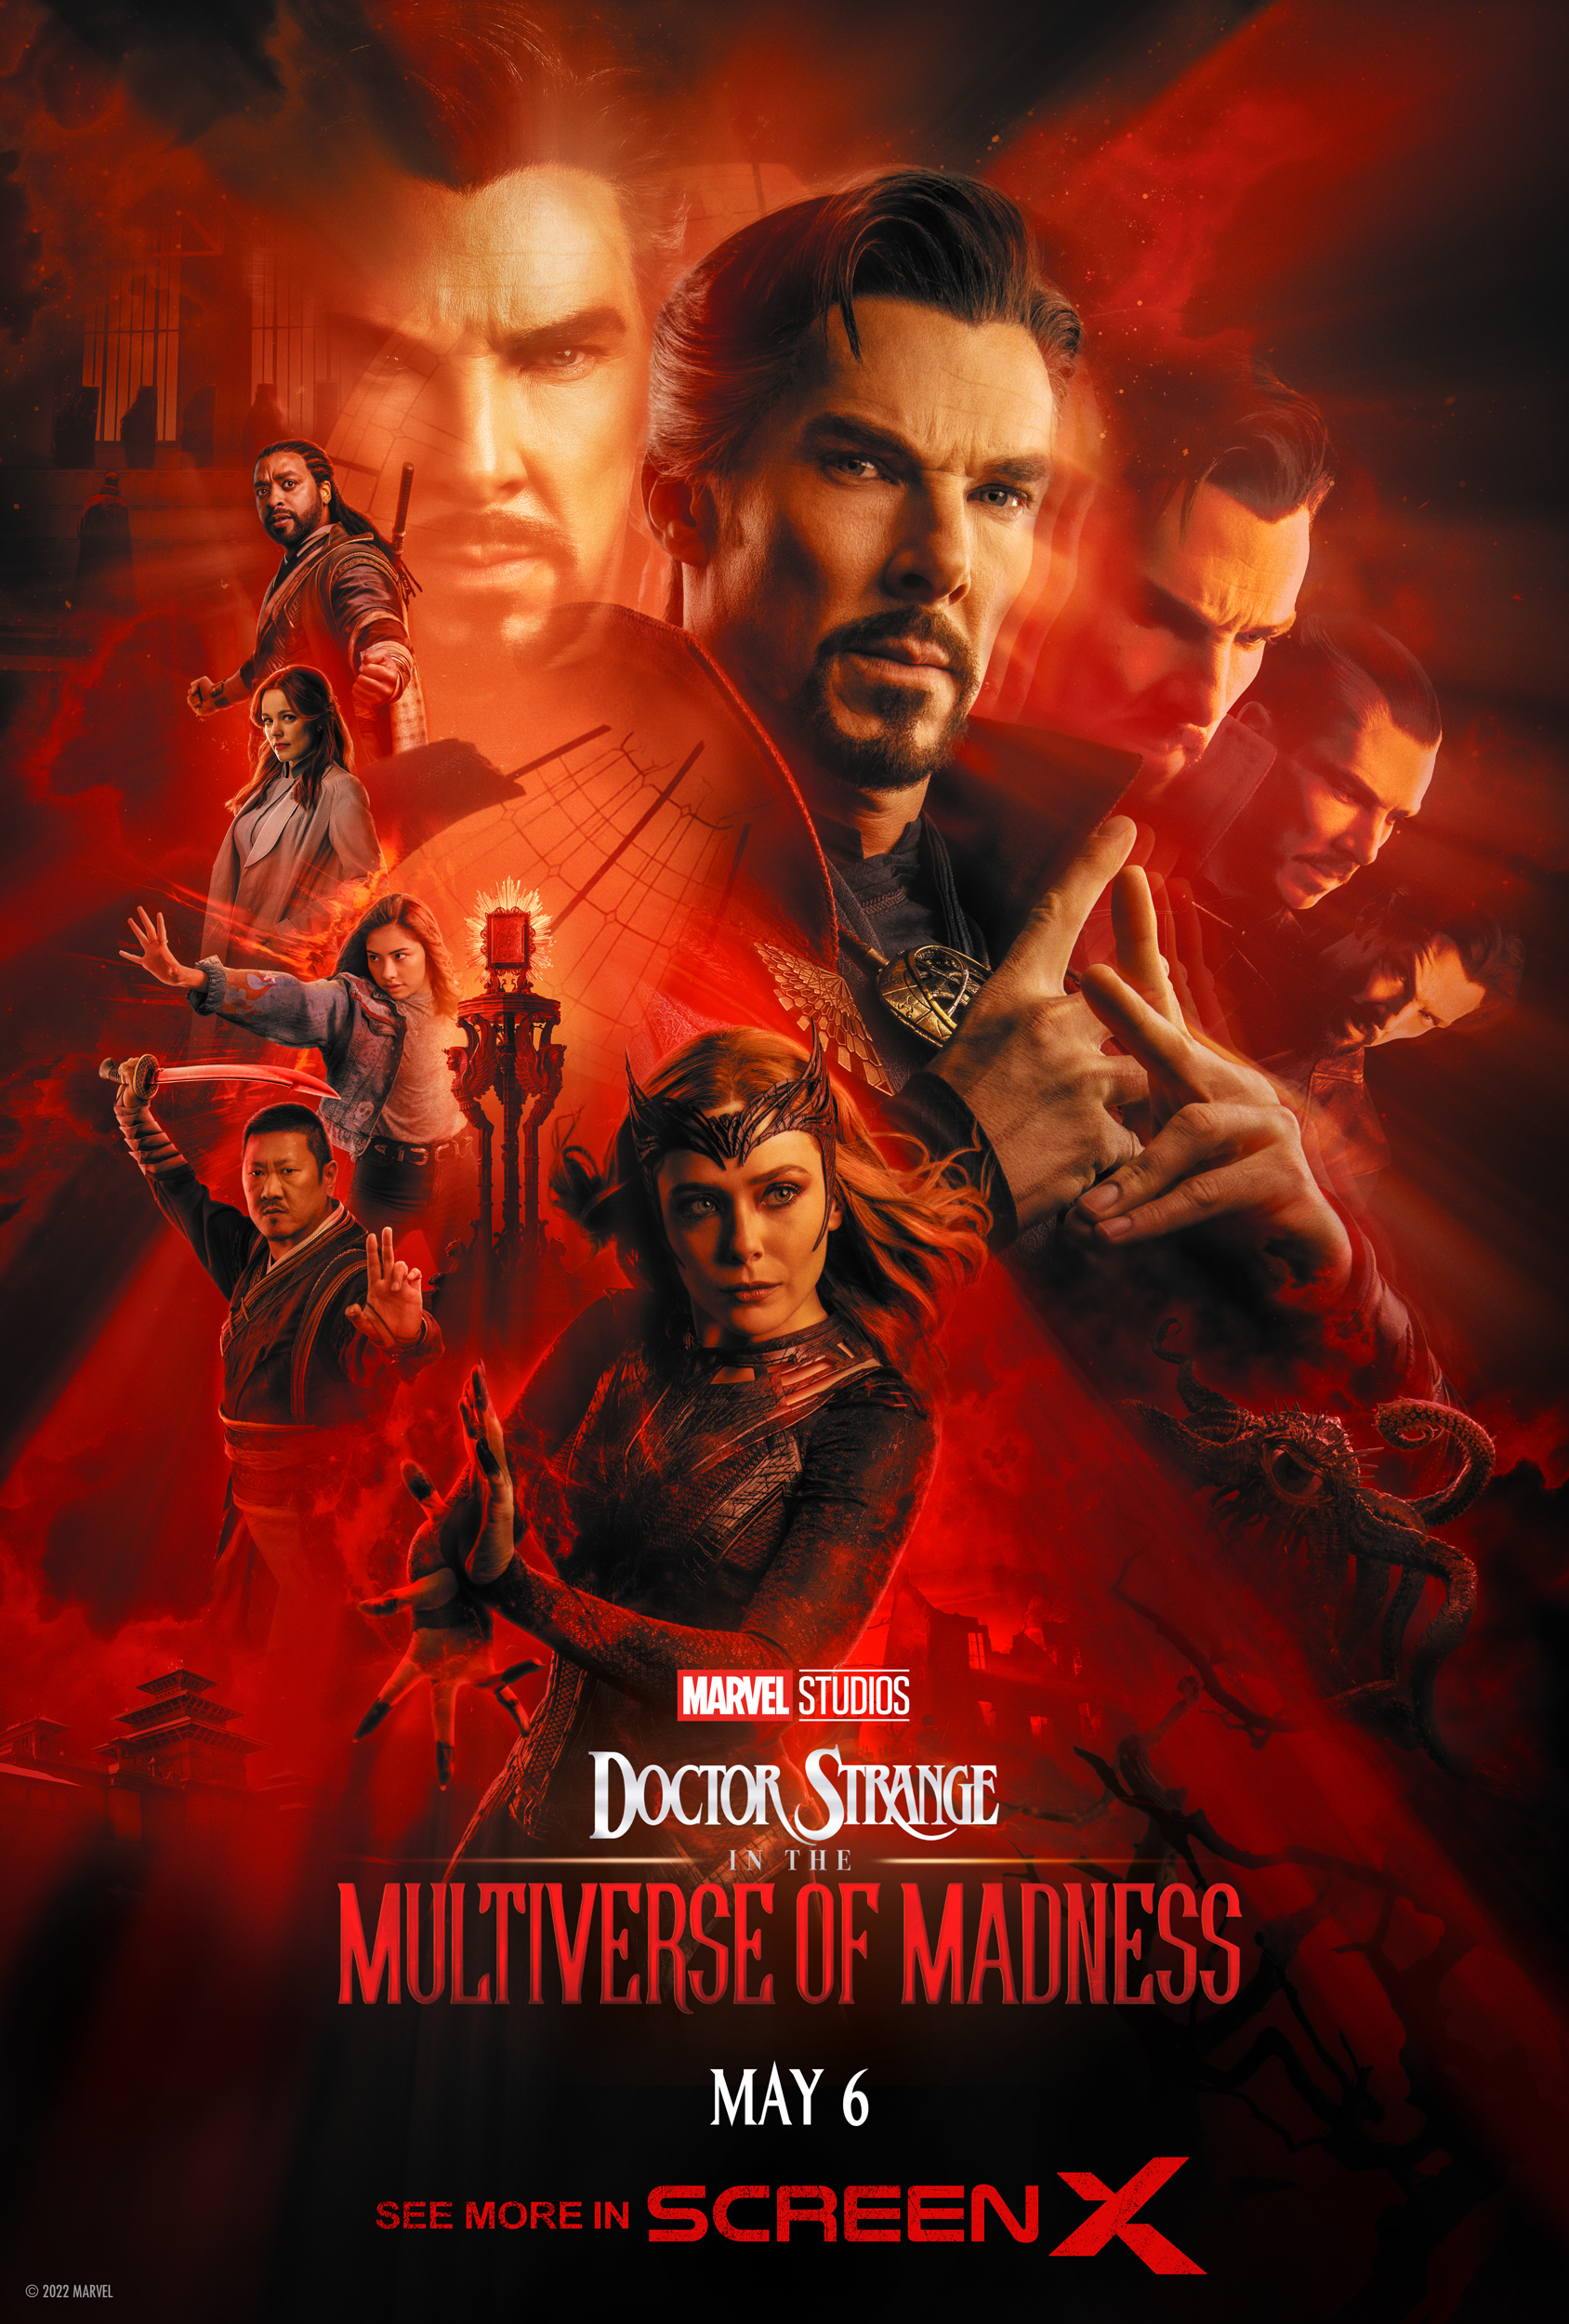 Doctor Strange in the Multiverse of Madness (2022) 720p HEVC HDRip x265 ESubs ORG. [Dual Audio] [Hindi or English] [650MB] Full Hollywood Movie Hindi